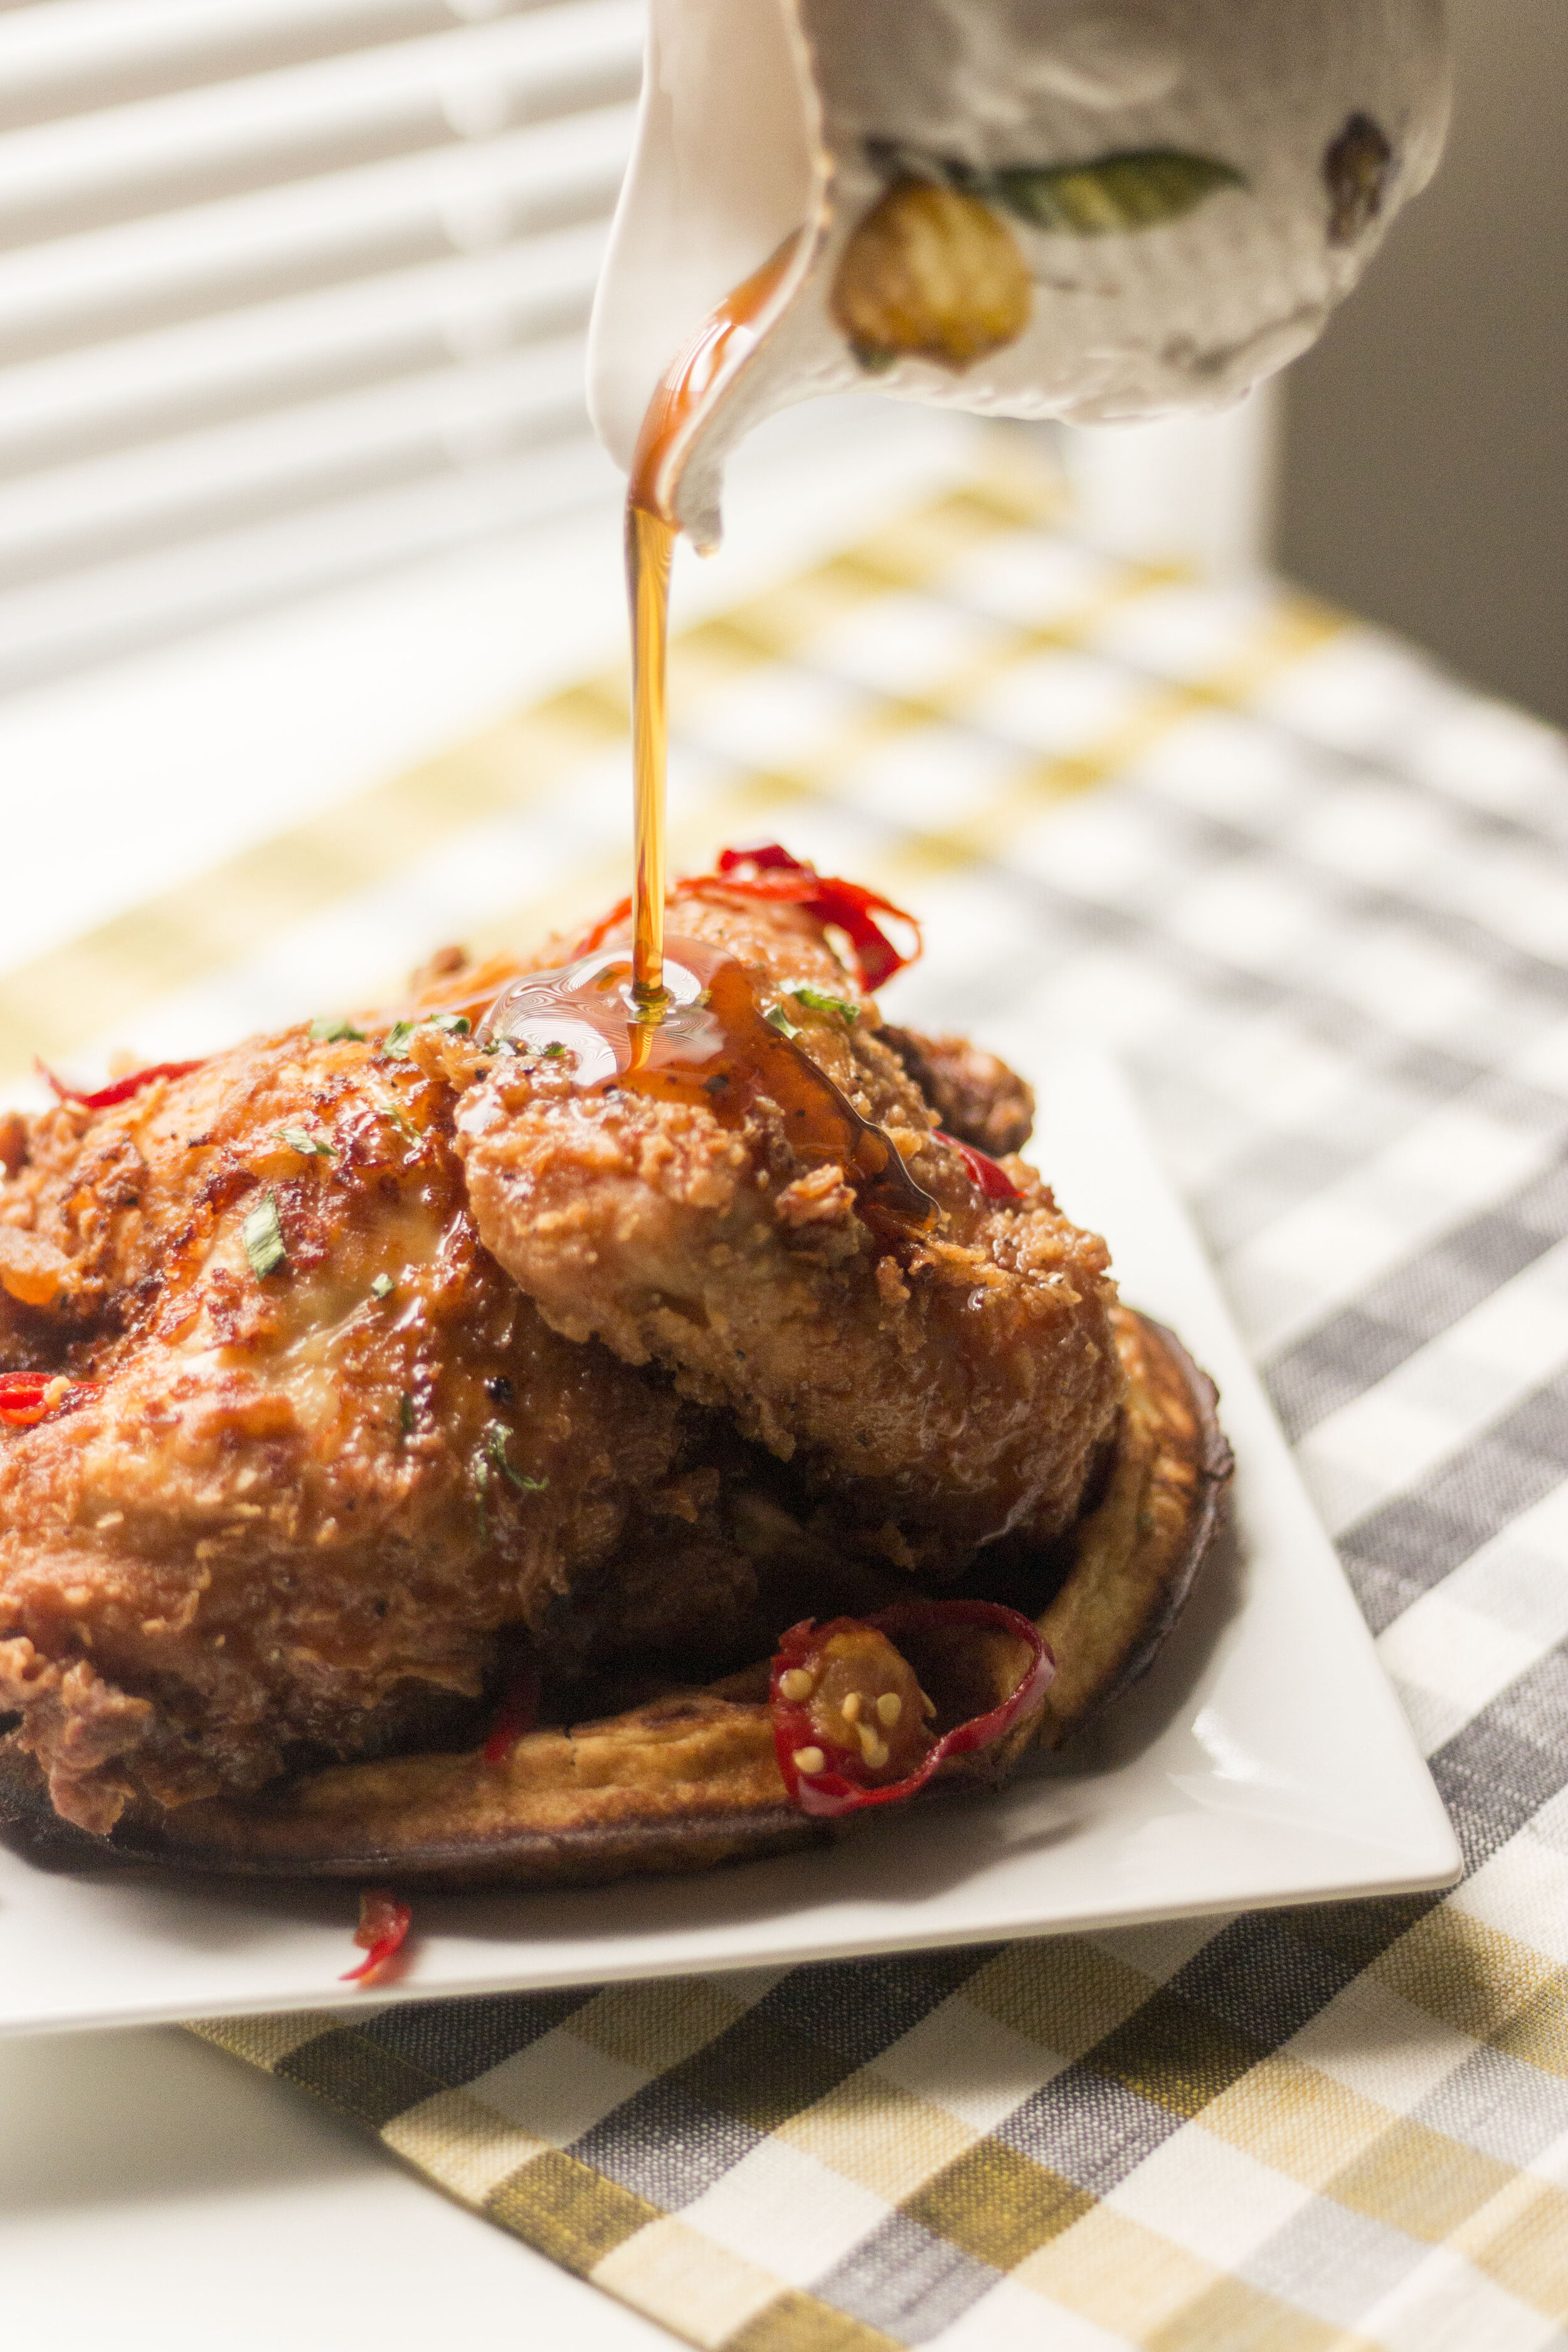 Southern Kin Fried Chicken and Waffles